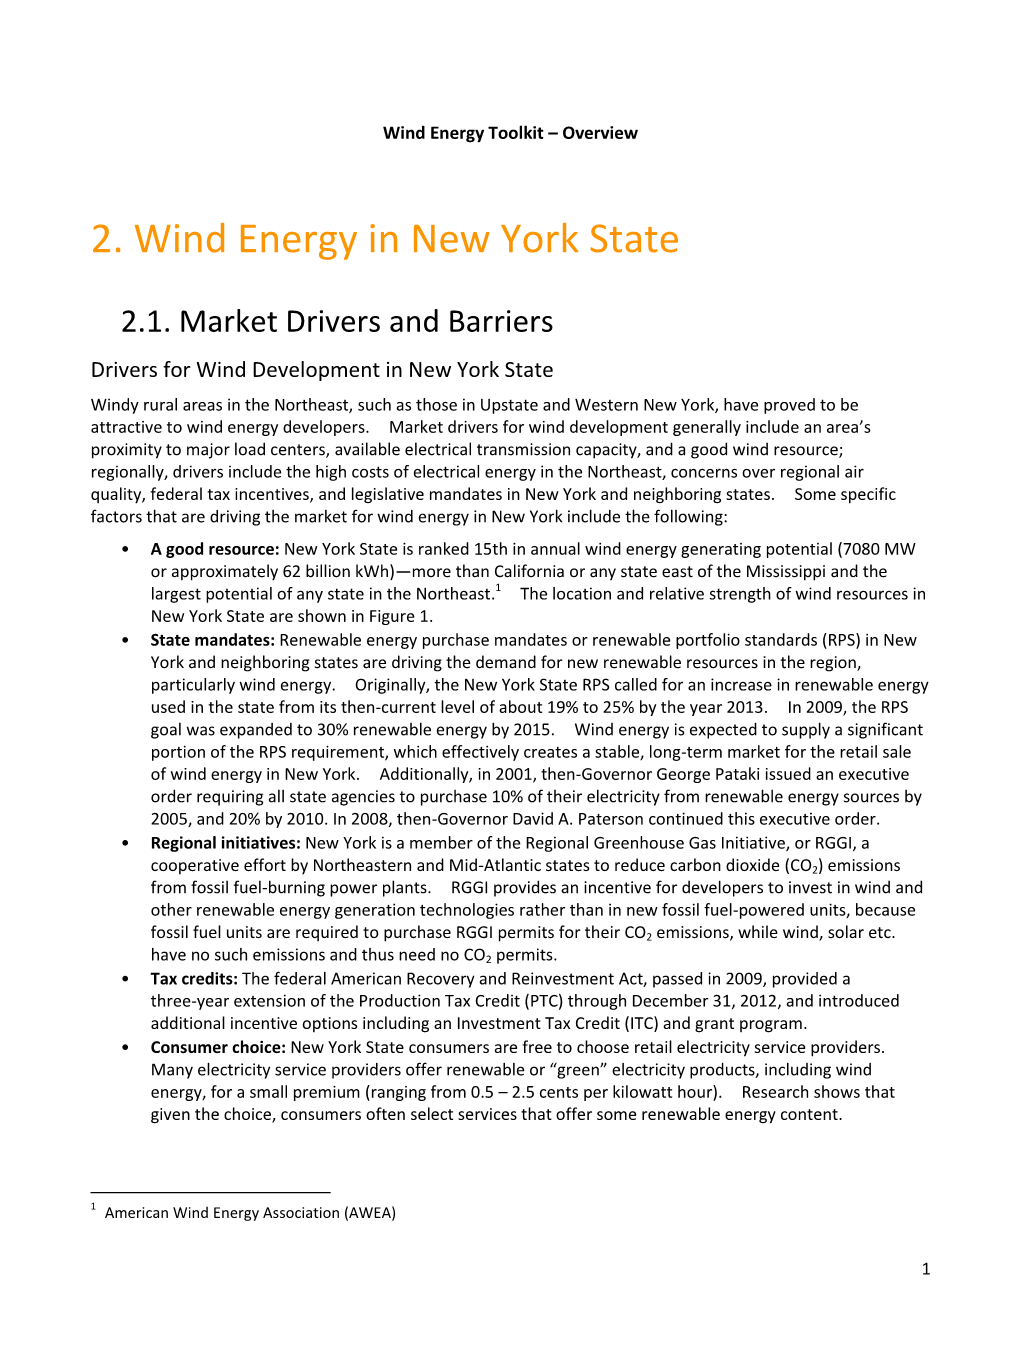 2. Wind Energy in New York State